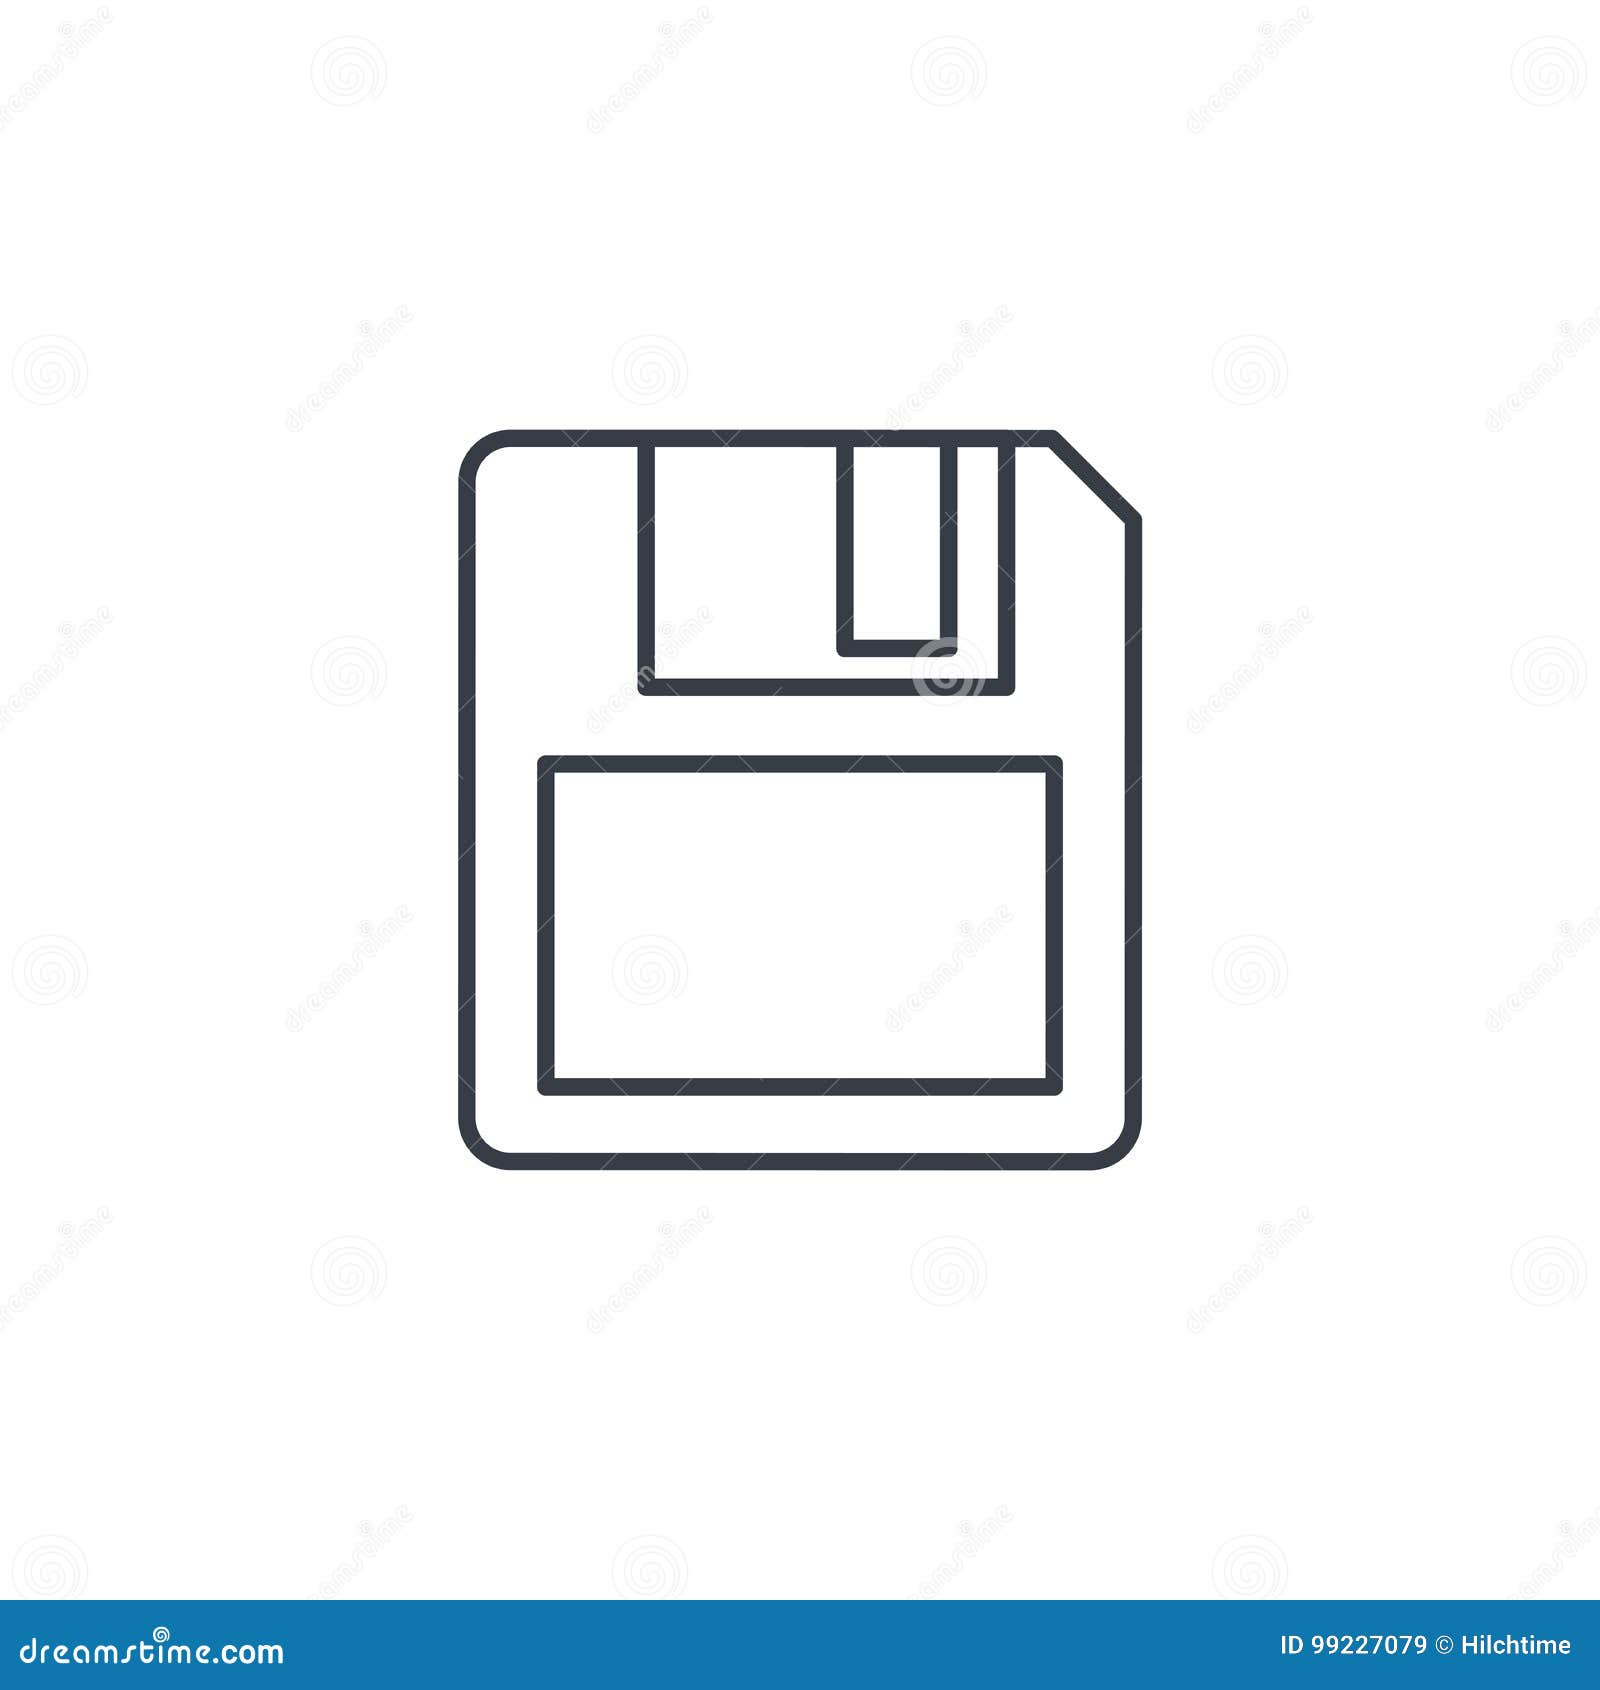 Floppy disk or save flat icon for apps and websites Stock Vector